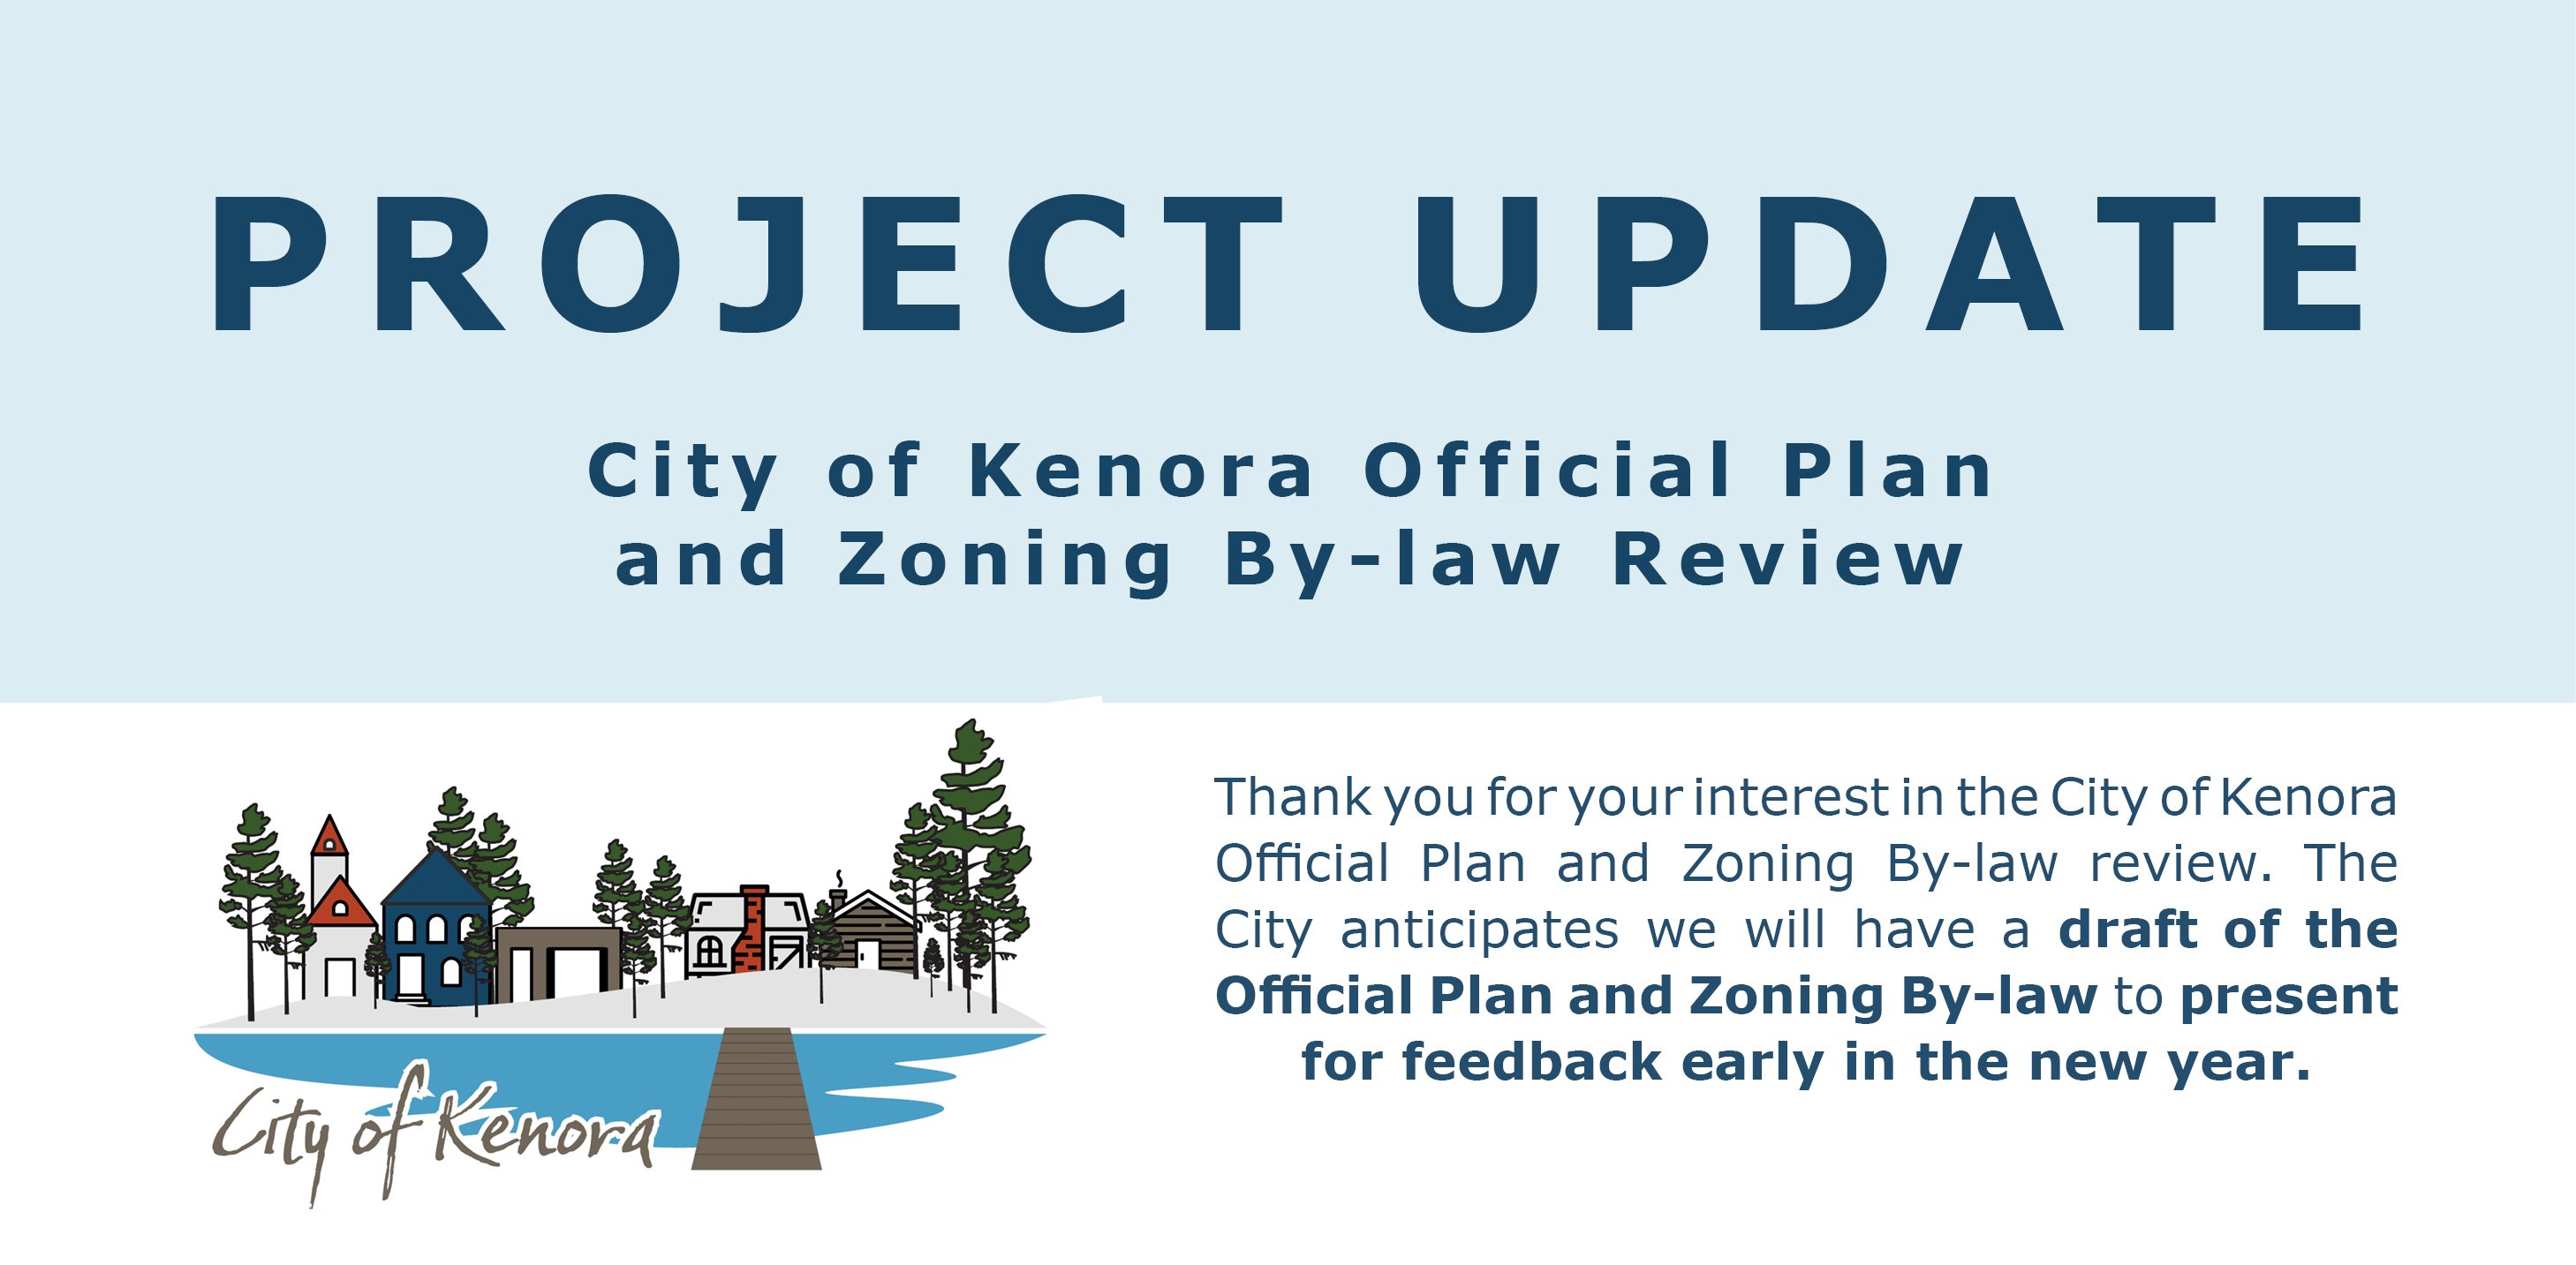 Official Plan and Zoning By-law Review logo and project update